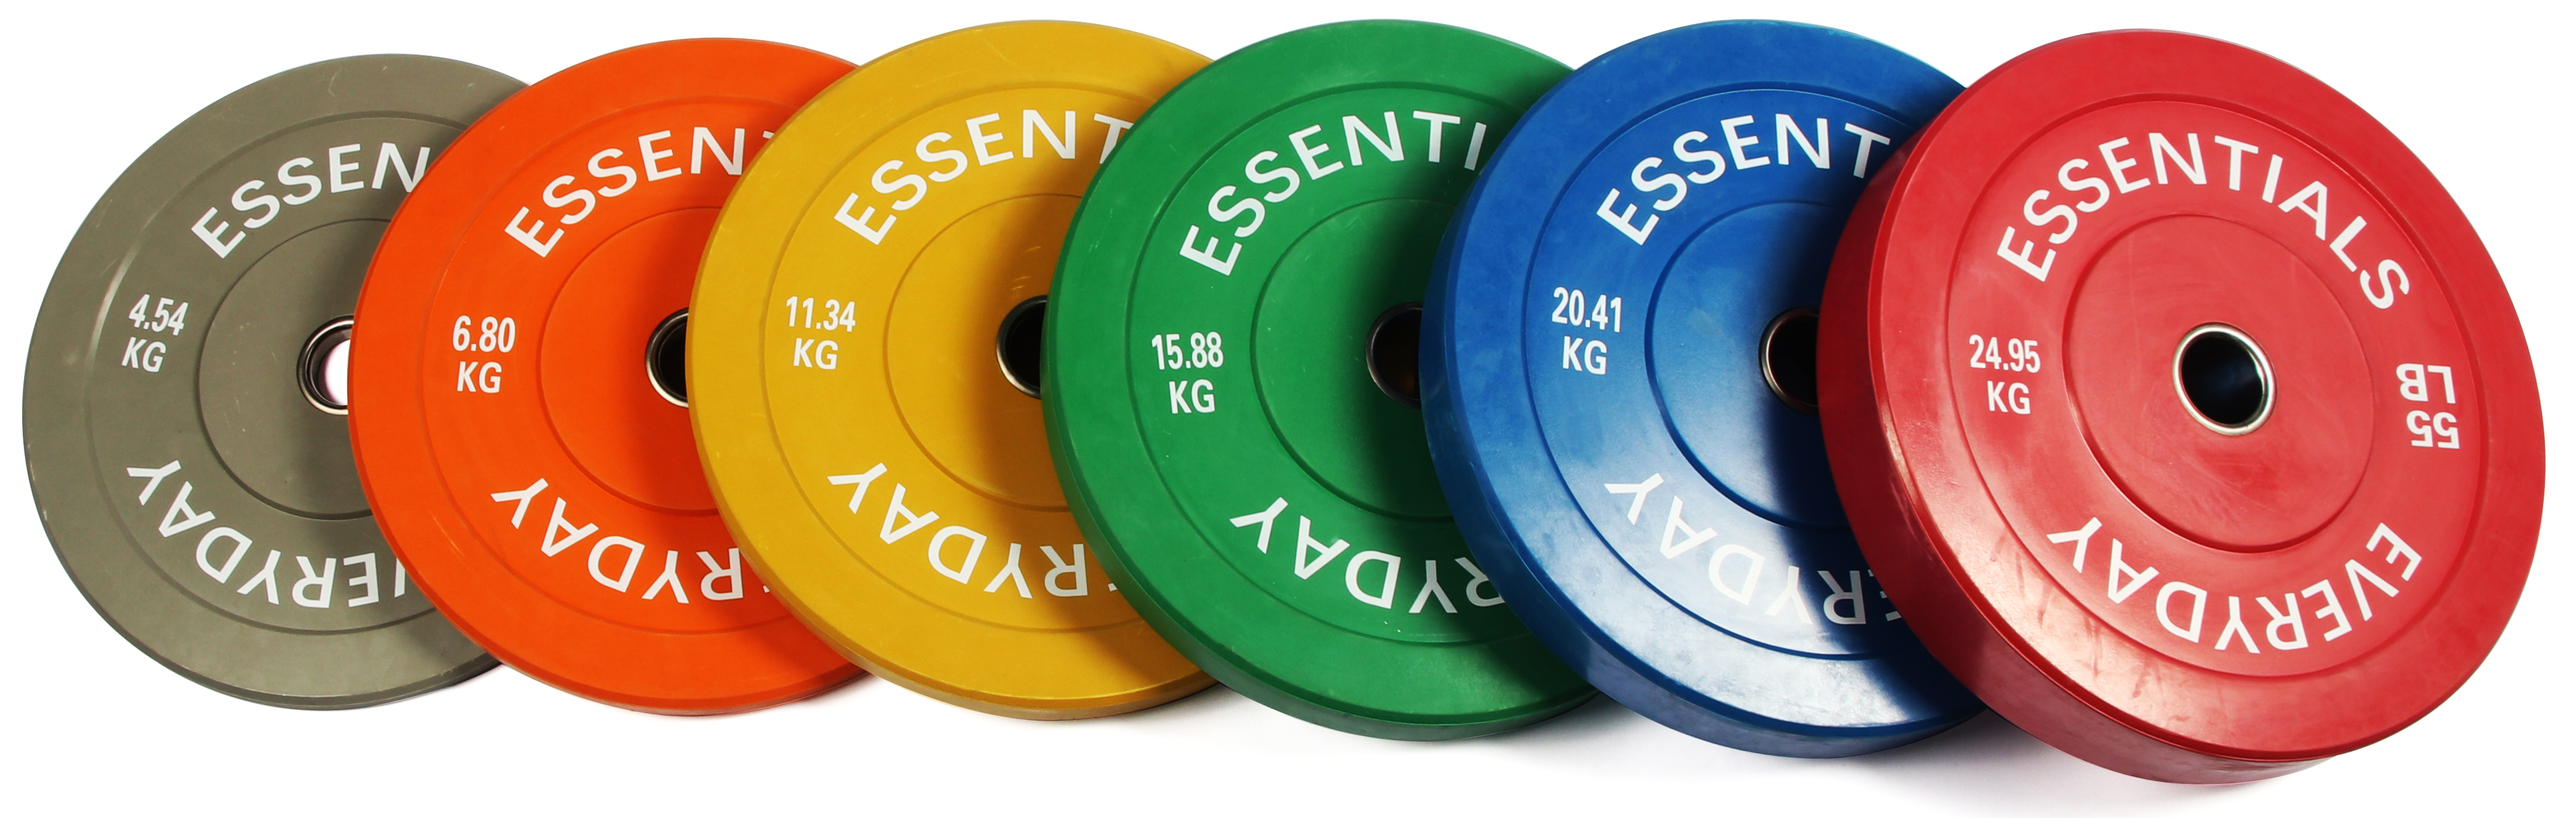 BalanceFrom Olympic Bumper Plate Weight Plate with Steel Hub, Color Coded, 45 lbs Single - image 4 of 4